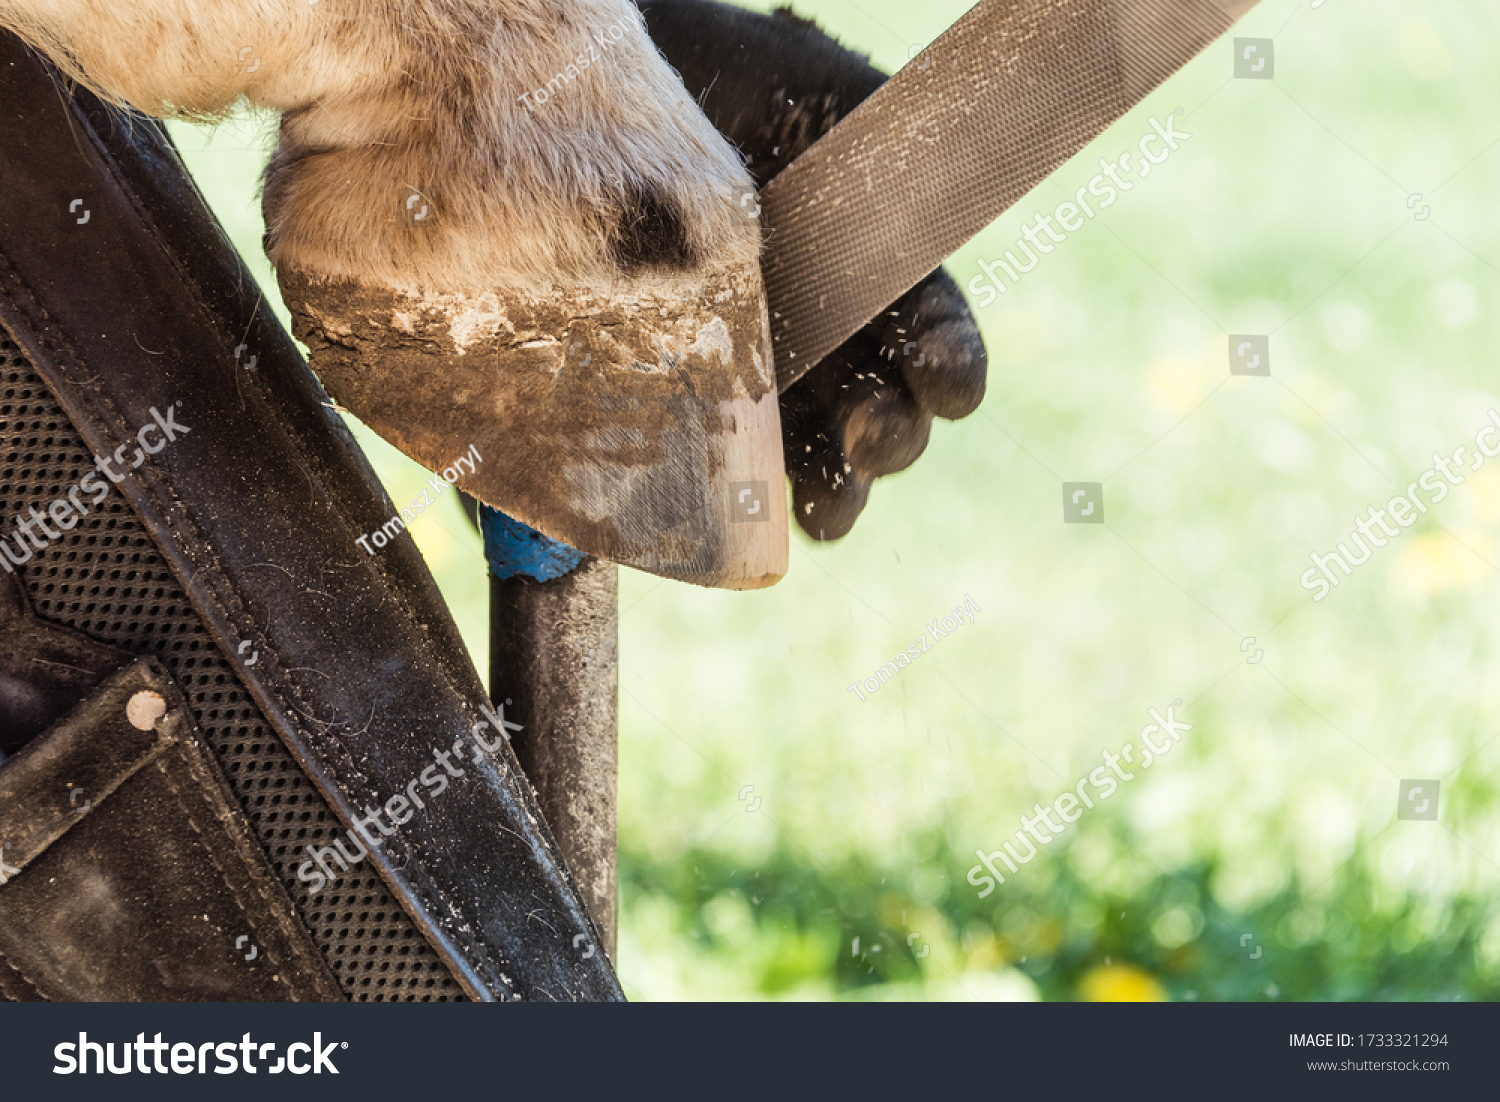 Horse farrier at work - trims and shapes a horse's hooves using rasper and knife. The close-up of horse hoof. #1733321294